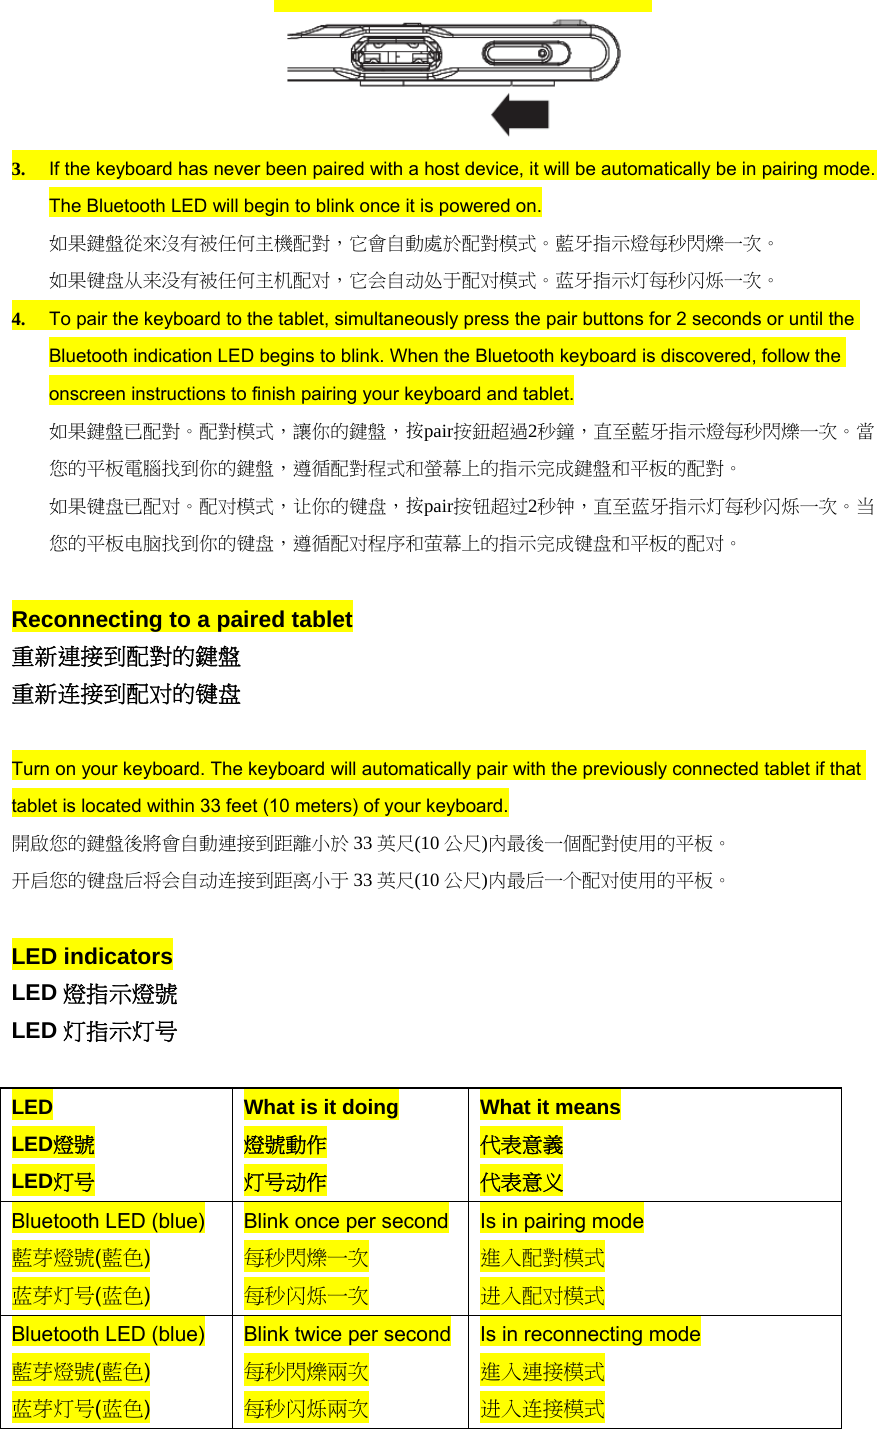  3. If the keyboard has never been paired with a host device, it will be automatically be in pairing mode. The Bluetooth LED will begin to blink once it is powered on. 如果鍵盤從來沒有被任何主機配對，它會自動處於配對模式。藍牙指示燈每秒閃爍一次。 如果键盘从来没有被任何主机配对，它会自动处于配对模式。蓝牙指示灯每秒闪烁一次。 4. To pair the keyboard to the tablet, simultaneously press the pair buttons for 2 seconds or until the Bluetooth indication LED begins to blink. When the Bluetooth keyboard is discovered, follow the onscreen instructions to finish pairing your keyboard and tablet. 如果鍵盤已配對。配對模式，讓你的鍵盤，按pair按鈕超過2秒鐘，直至藍牙指示燈每秒閃爍一次。當您的平板電腦找到你的鍵盤，遵循配對程式和螢幕上的指示完成鍵盤和平板的配對。 如果键盘已配对。配对模式，让你的键盘，按pair按钮超过2秒钟，直至蓝牙指示灯每秒闪烁一次。当您的平板电脑找到你的键盘，遵循配对程序和萤幕上的指示完成键盘和平板的配对。  Reconnecting to a paired tablet 重新連接到配對的鍵盤 重新连接到配对的键盘  Turn on your keyboard. The keyboard will automatically pair with the previously connected tablet if that tablet is located within 33 feet (10 meters) of your keyboard. 開啟您的鍵盤後將會自動連接到距離小於 33 英尺(10 公尺)內最後一個配對使用的平板。 开启您的键盘后将会自动连接到距离小于 33 英尺(10 公尺)内最后一个配对使用的平板。  LED indicators LED 燈指示燈號 LED 灯指示灯号  LED LED燈號 LED灯号 What is it doing 燈號動作 灯号动作 What it means 代表意義 代表意义 Bluetooth LED (blue) 藍芽燈號(藍色) 蓝芽灯号(蓝色) Blink once per second 每秒閃爍一次 每秒闪烁一次 Is in pairing mode 進入配對模式 进入配对模式 Bluetooth LED (blue) 藍芽燈號(藍色) 蓝芽灯号(蓝色) Blink twice per second每秒閃爍兩次 每秒闪烁兩次 Is in reconnecting mode 進入連接模式 进入连接模式 